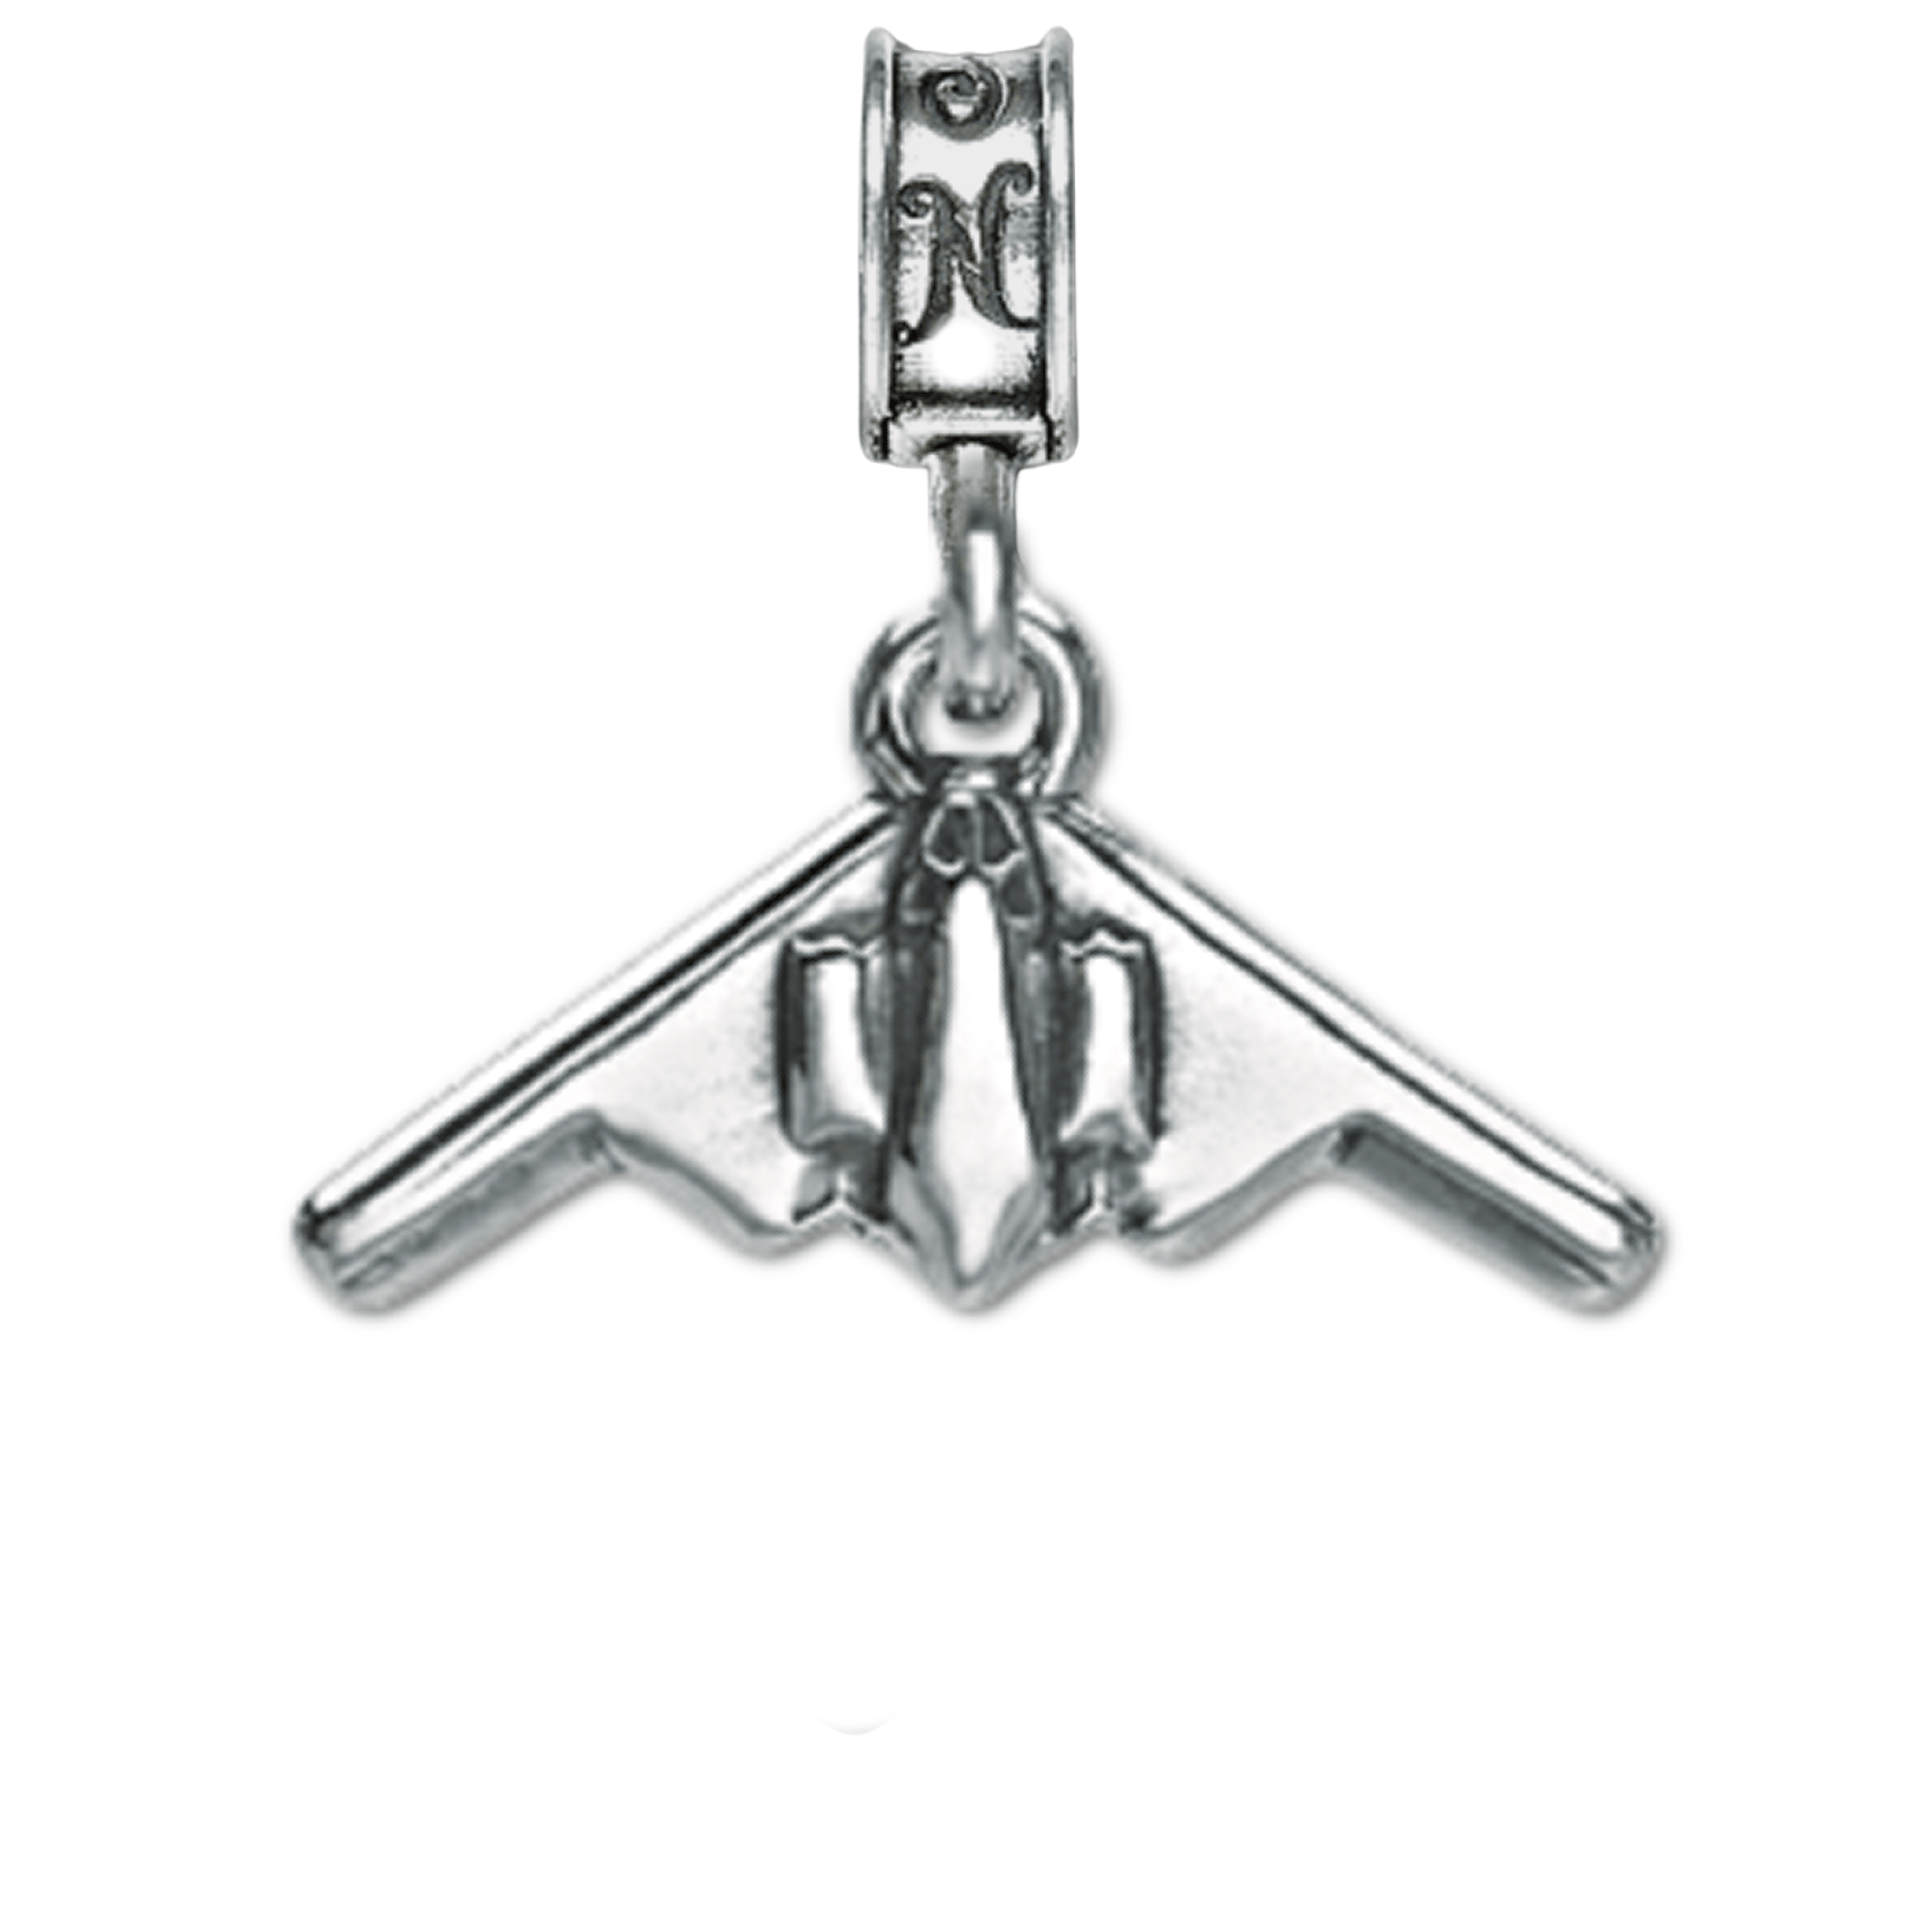 Military Jewelry, Military Charms, Military Gifts, Military Aviation, B-2 Charm